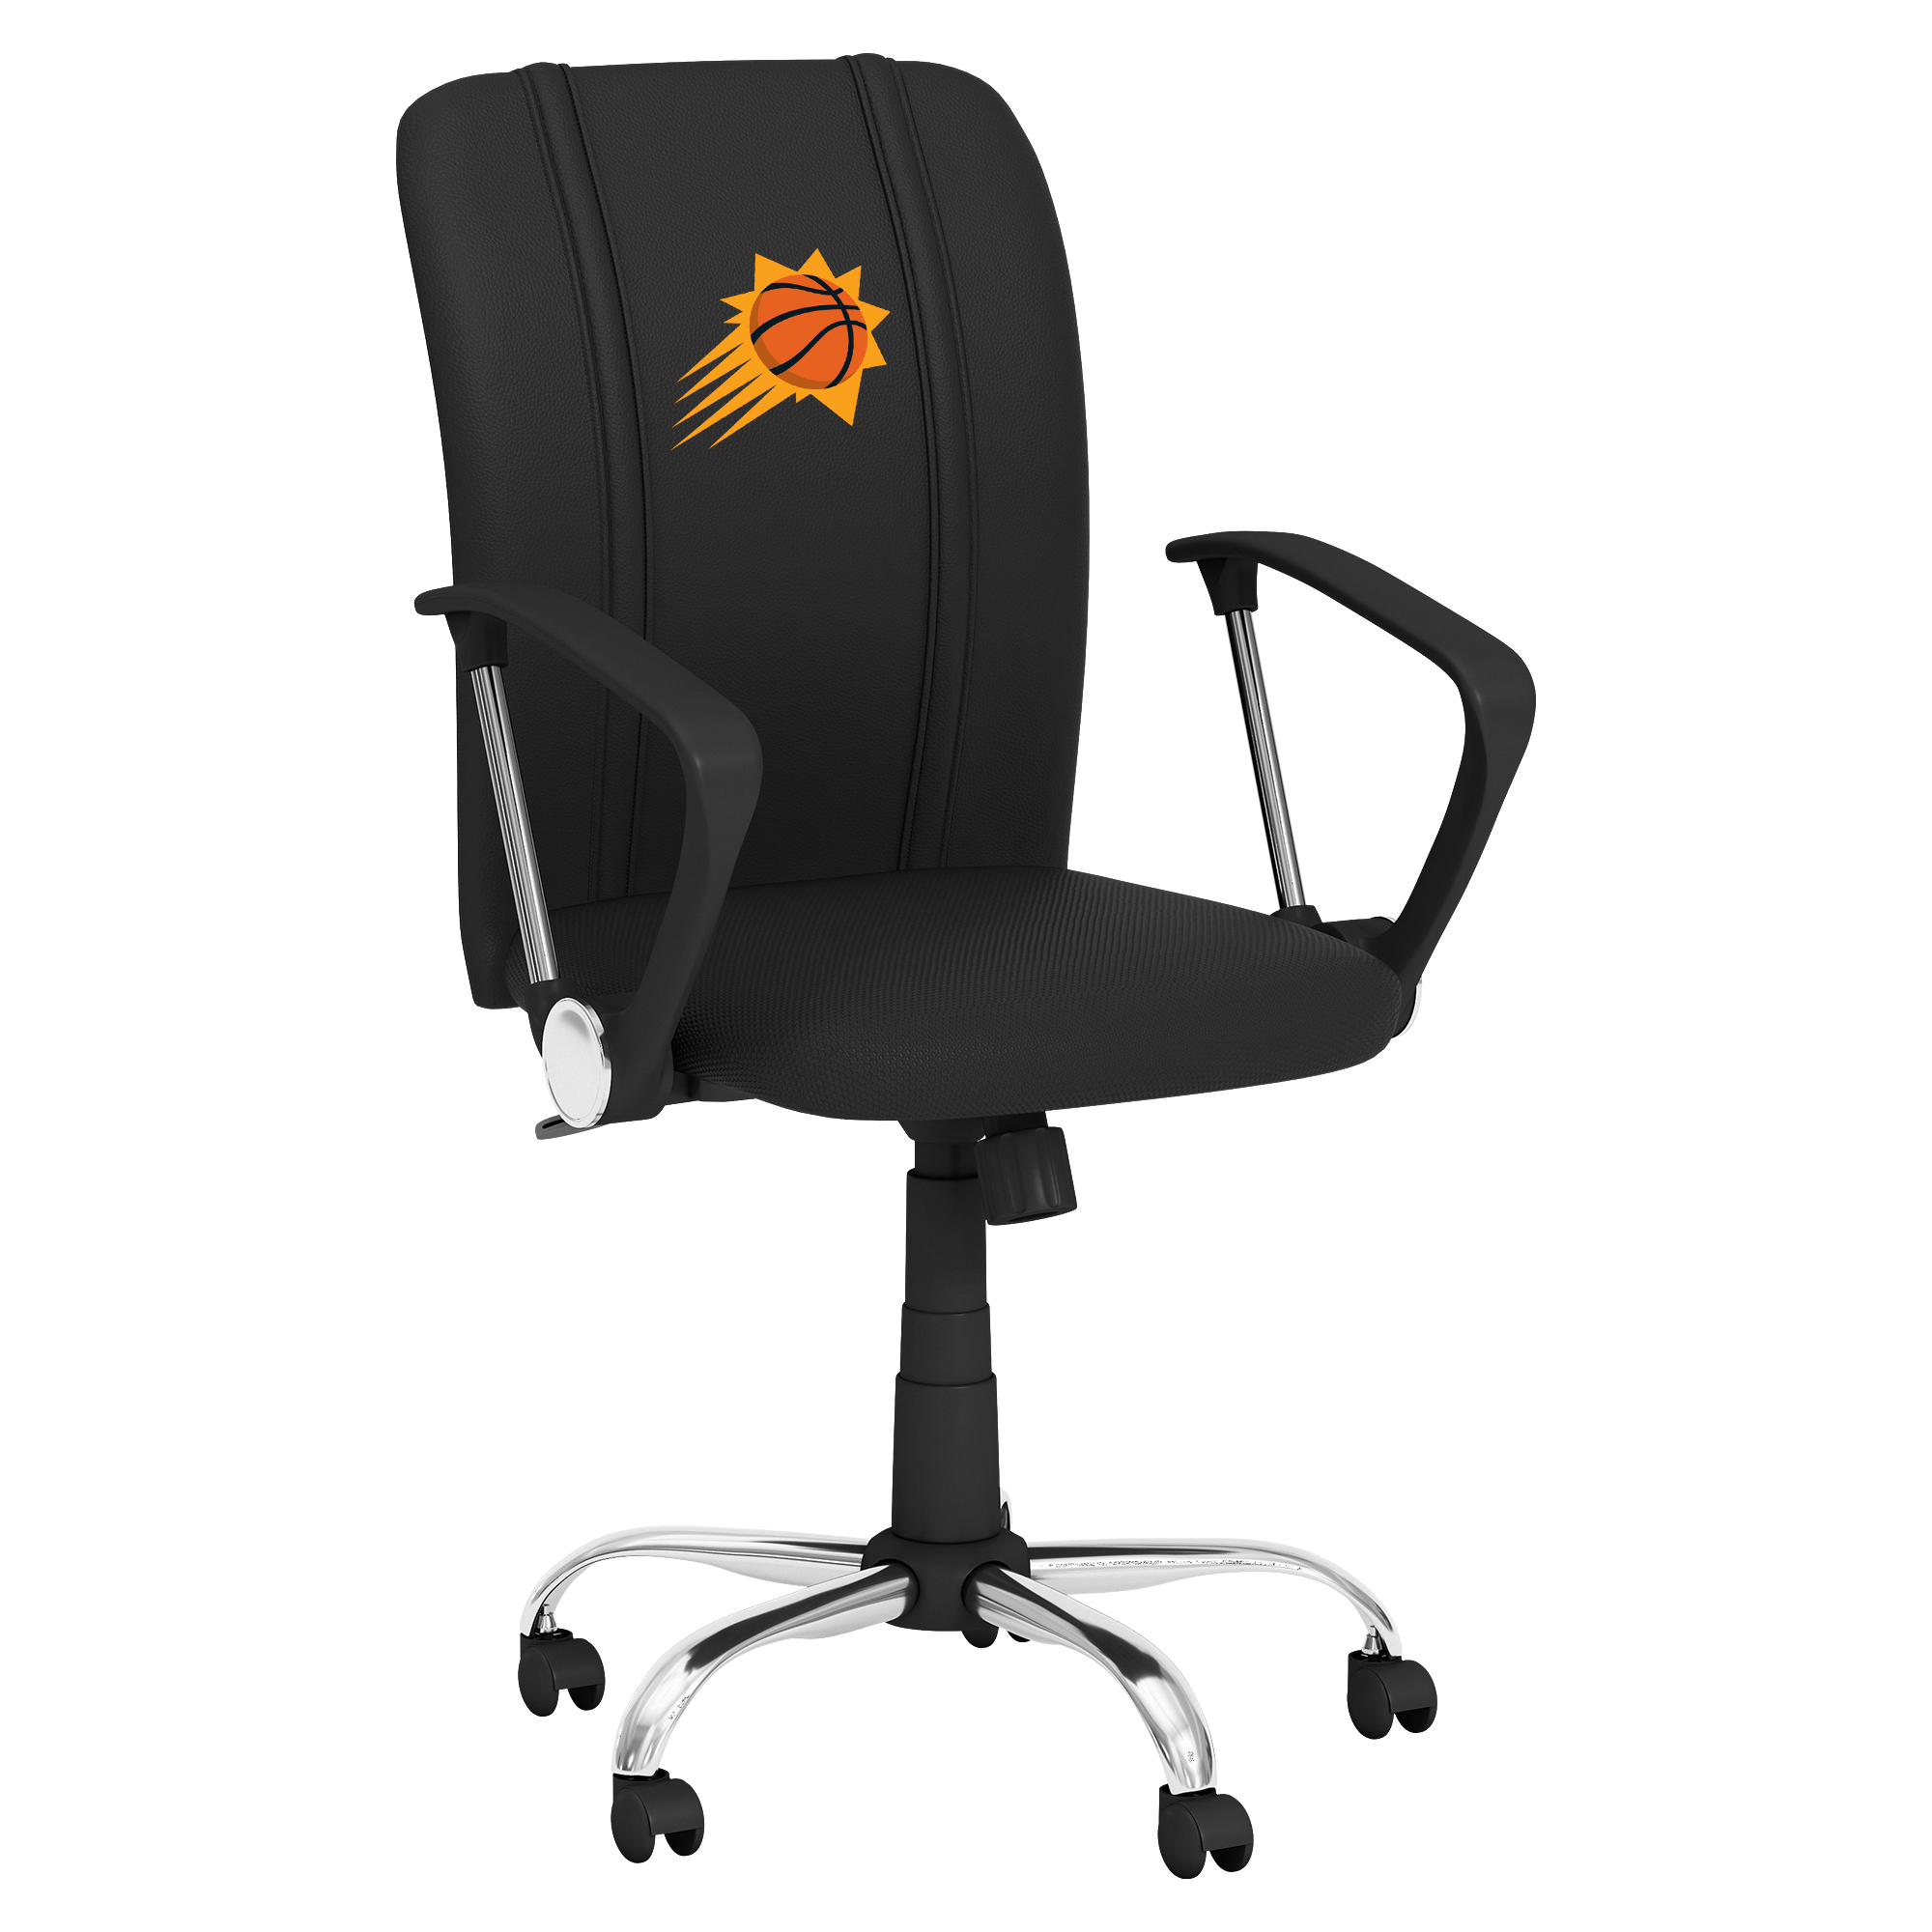 Phoenix Suns Curve Task Chair with Phoenix Suns Primary